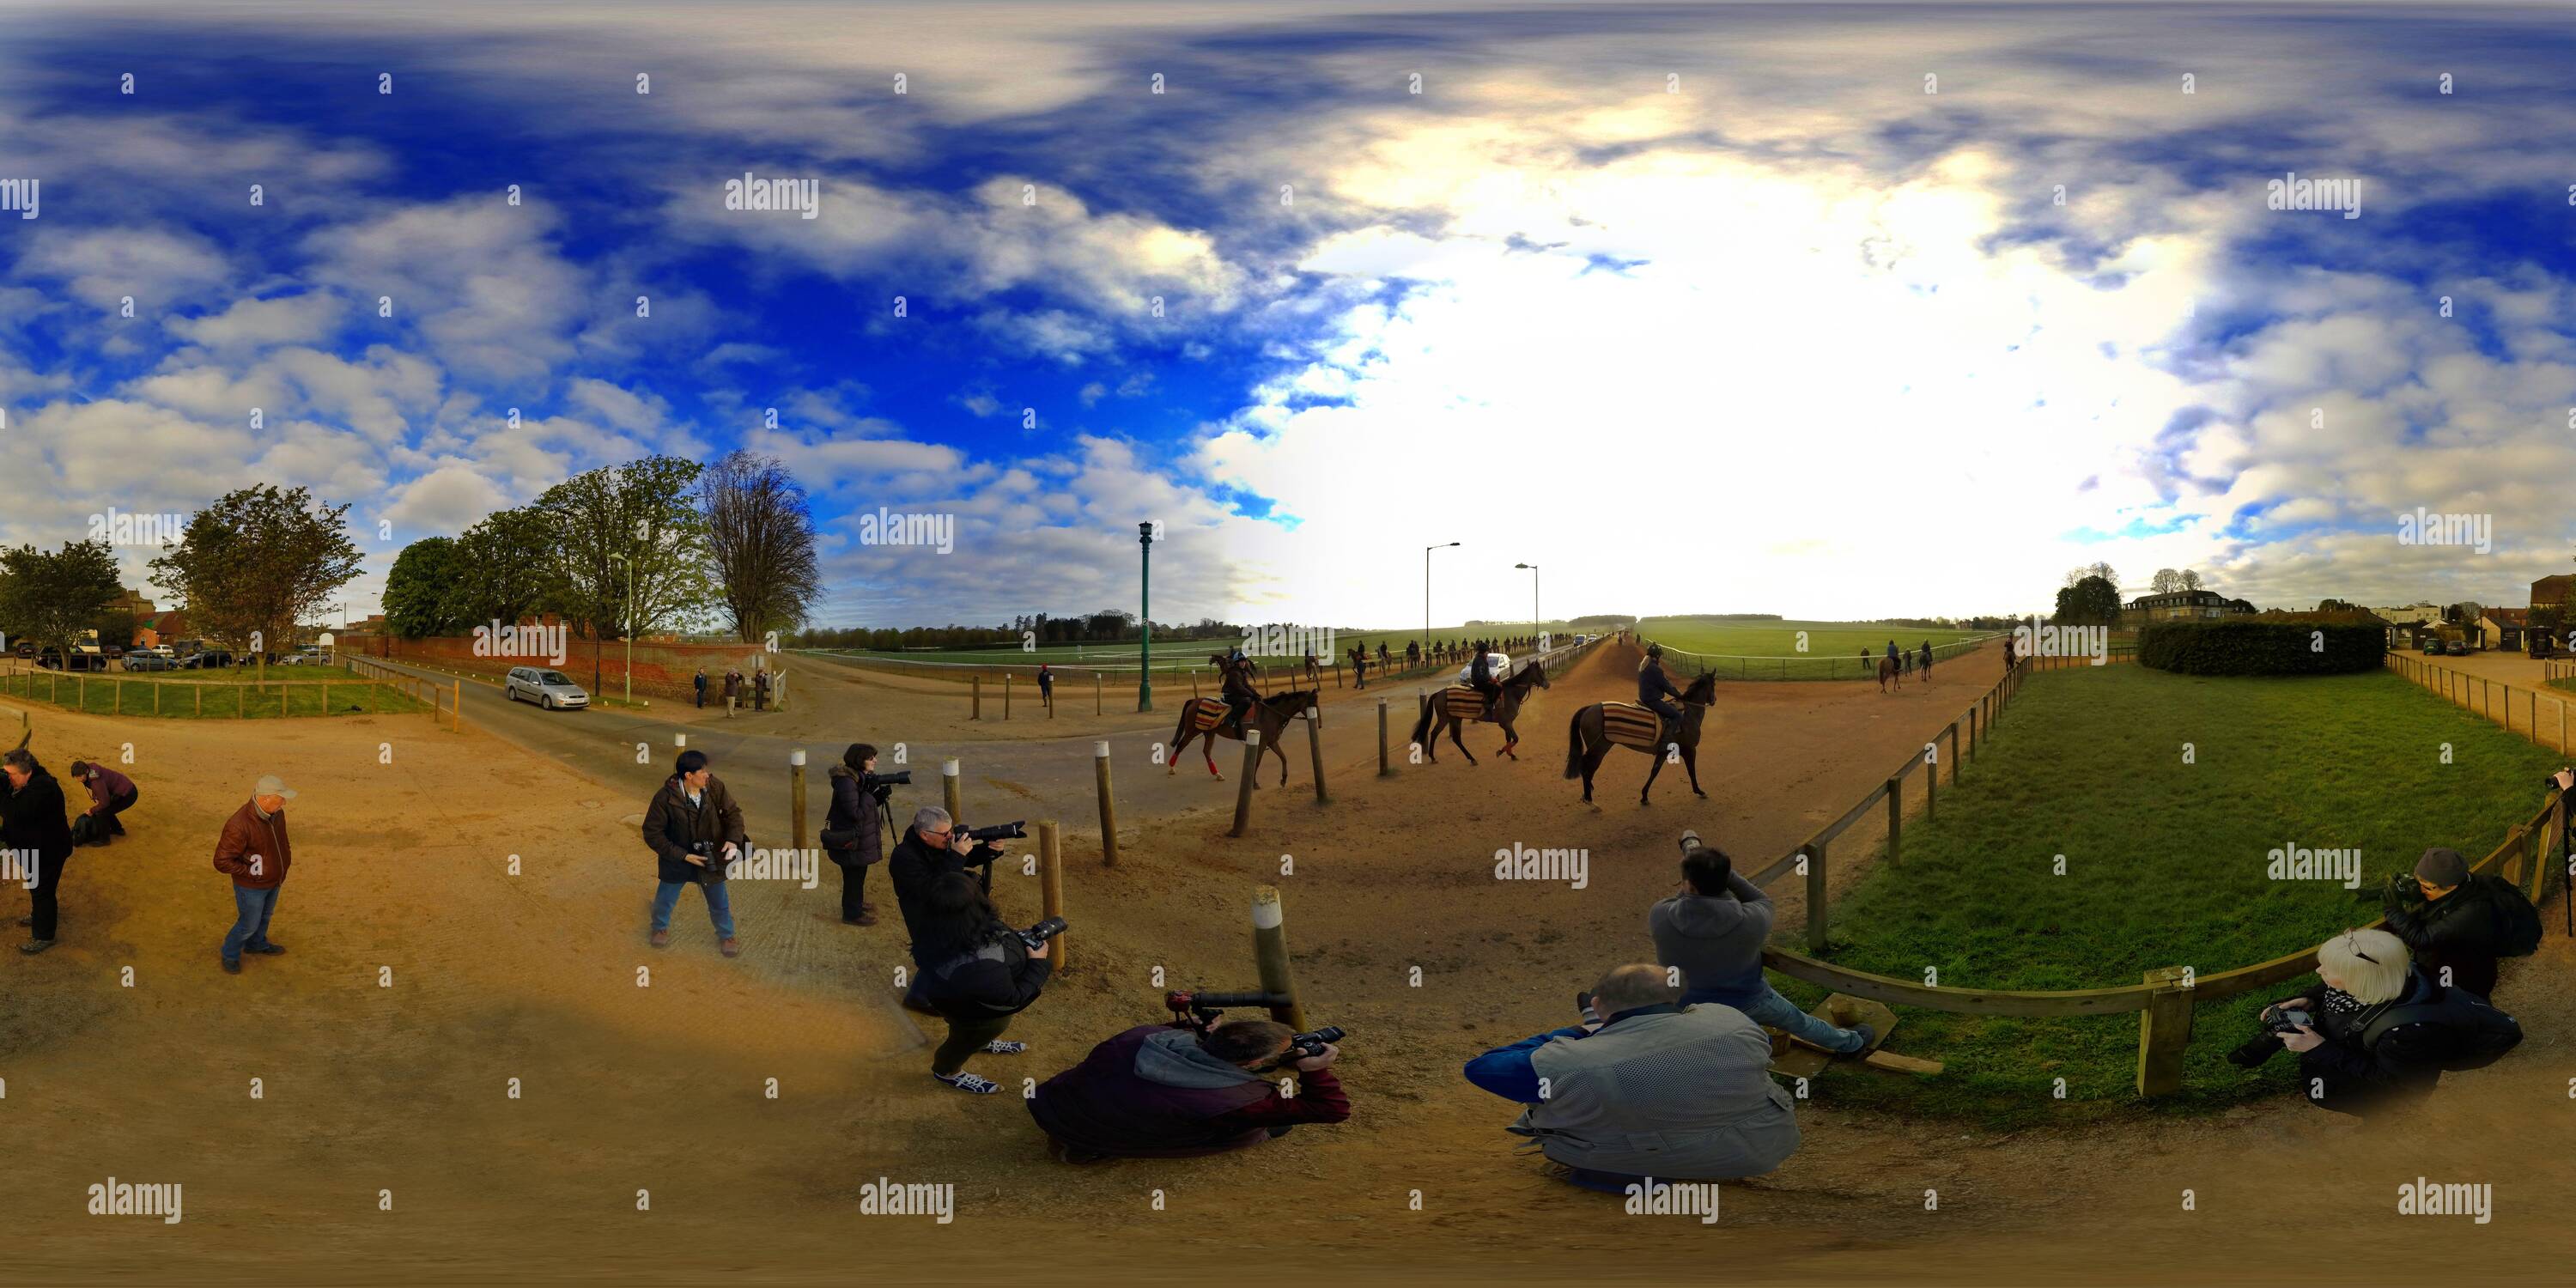 360 degree panoramic view of THOROUGHBRED RACEHORSES OF ARRIVE AT THE BOTTOM OF THE GALLOPS AT WARREN HILL, THE MAIN GALLOPS IN NEWMARKET, SUFFOLK. PICTURE :  MARK PAIN / ALAMY